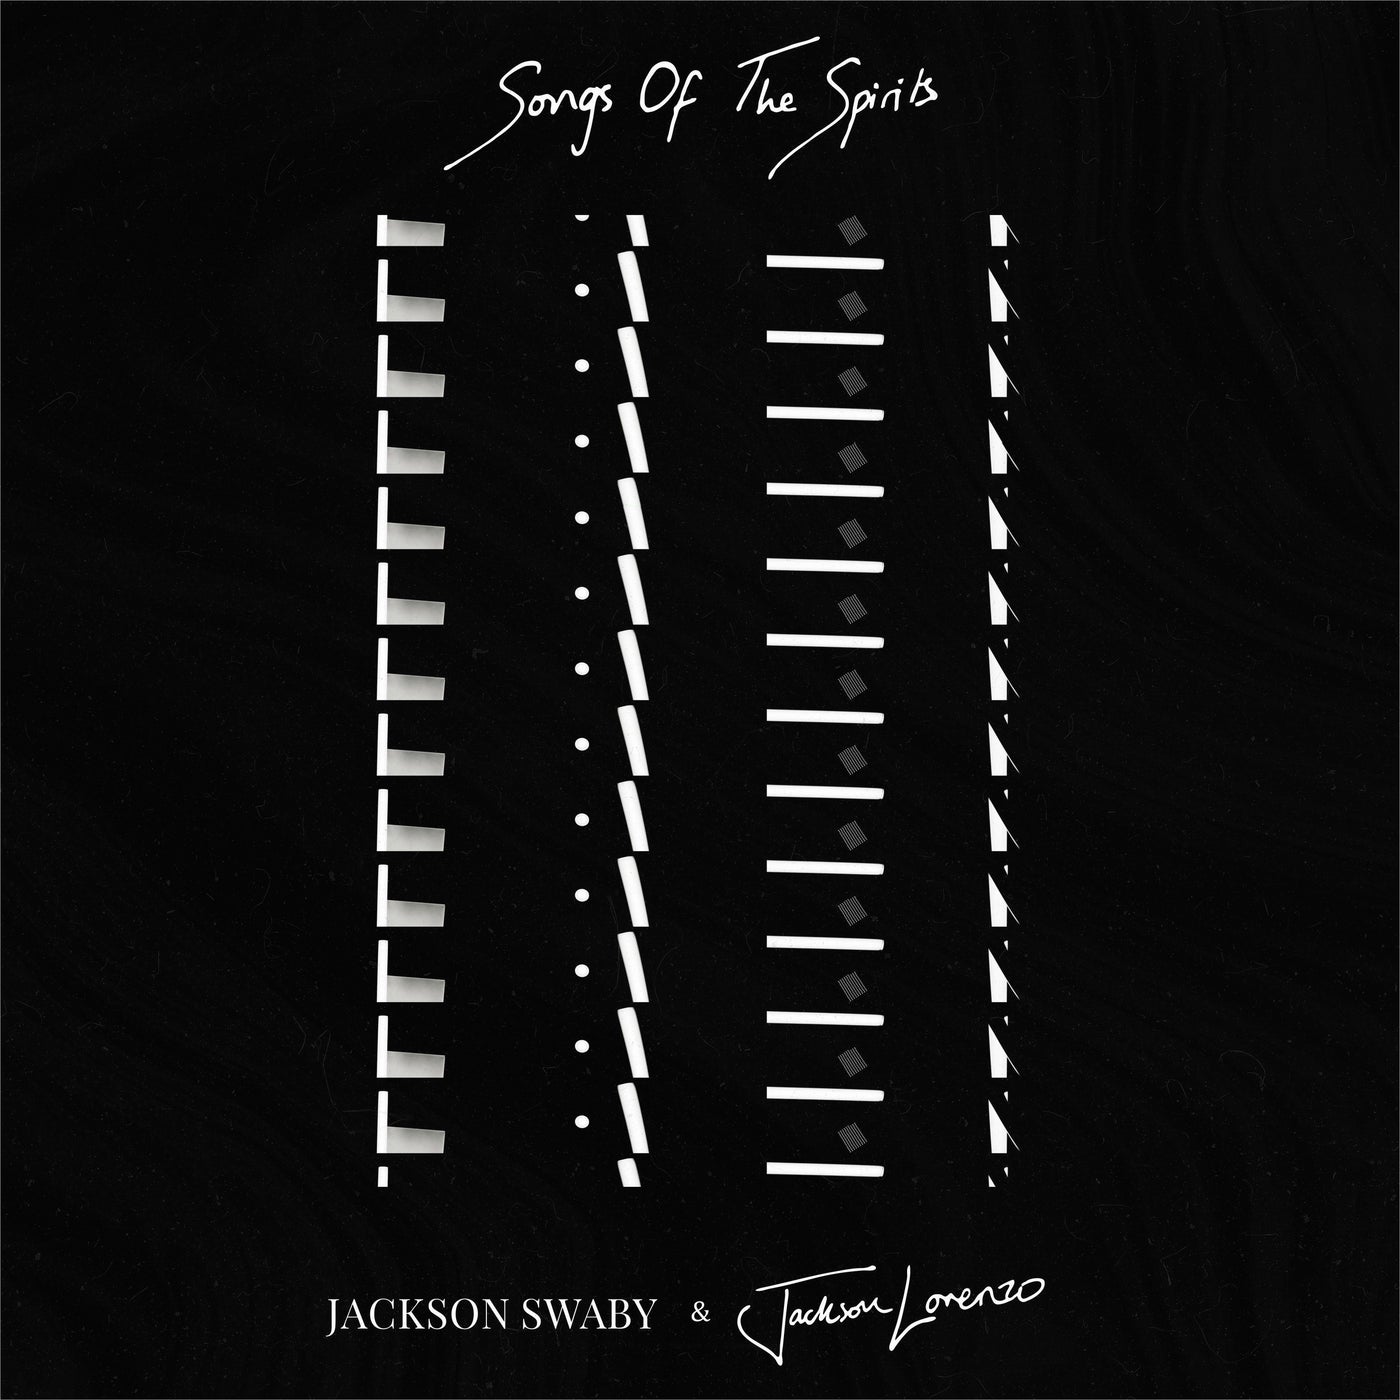 Songs of the Spirits